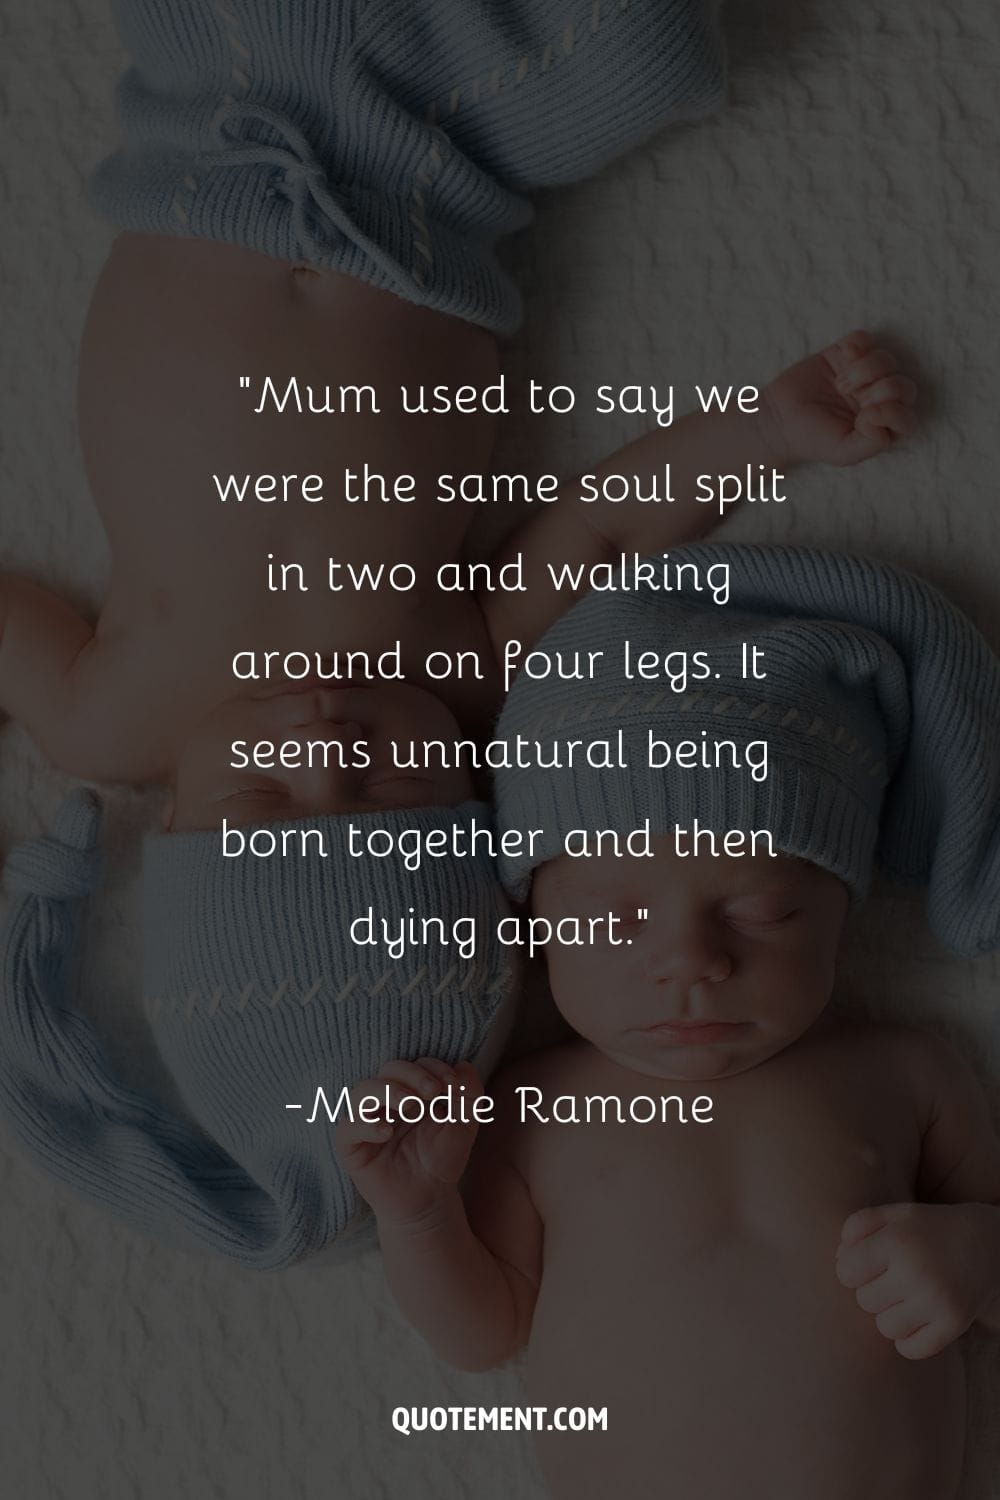 “Mum used to say we were the same soul split in two and walking around on four legs. It seems unnatural being born together and then dying apart.” ― Melodie Ramone